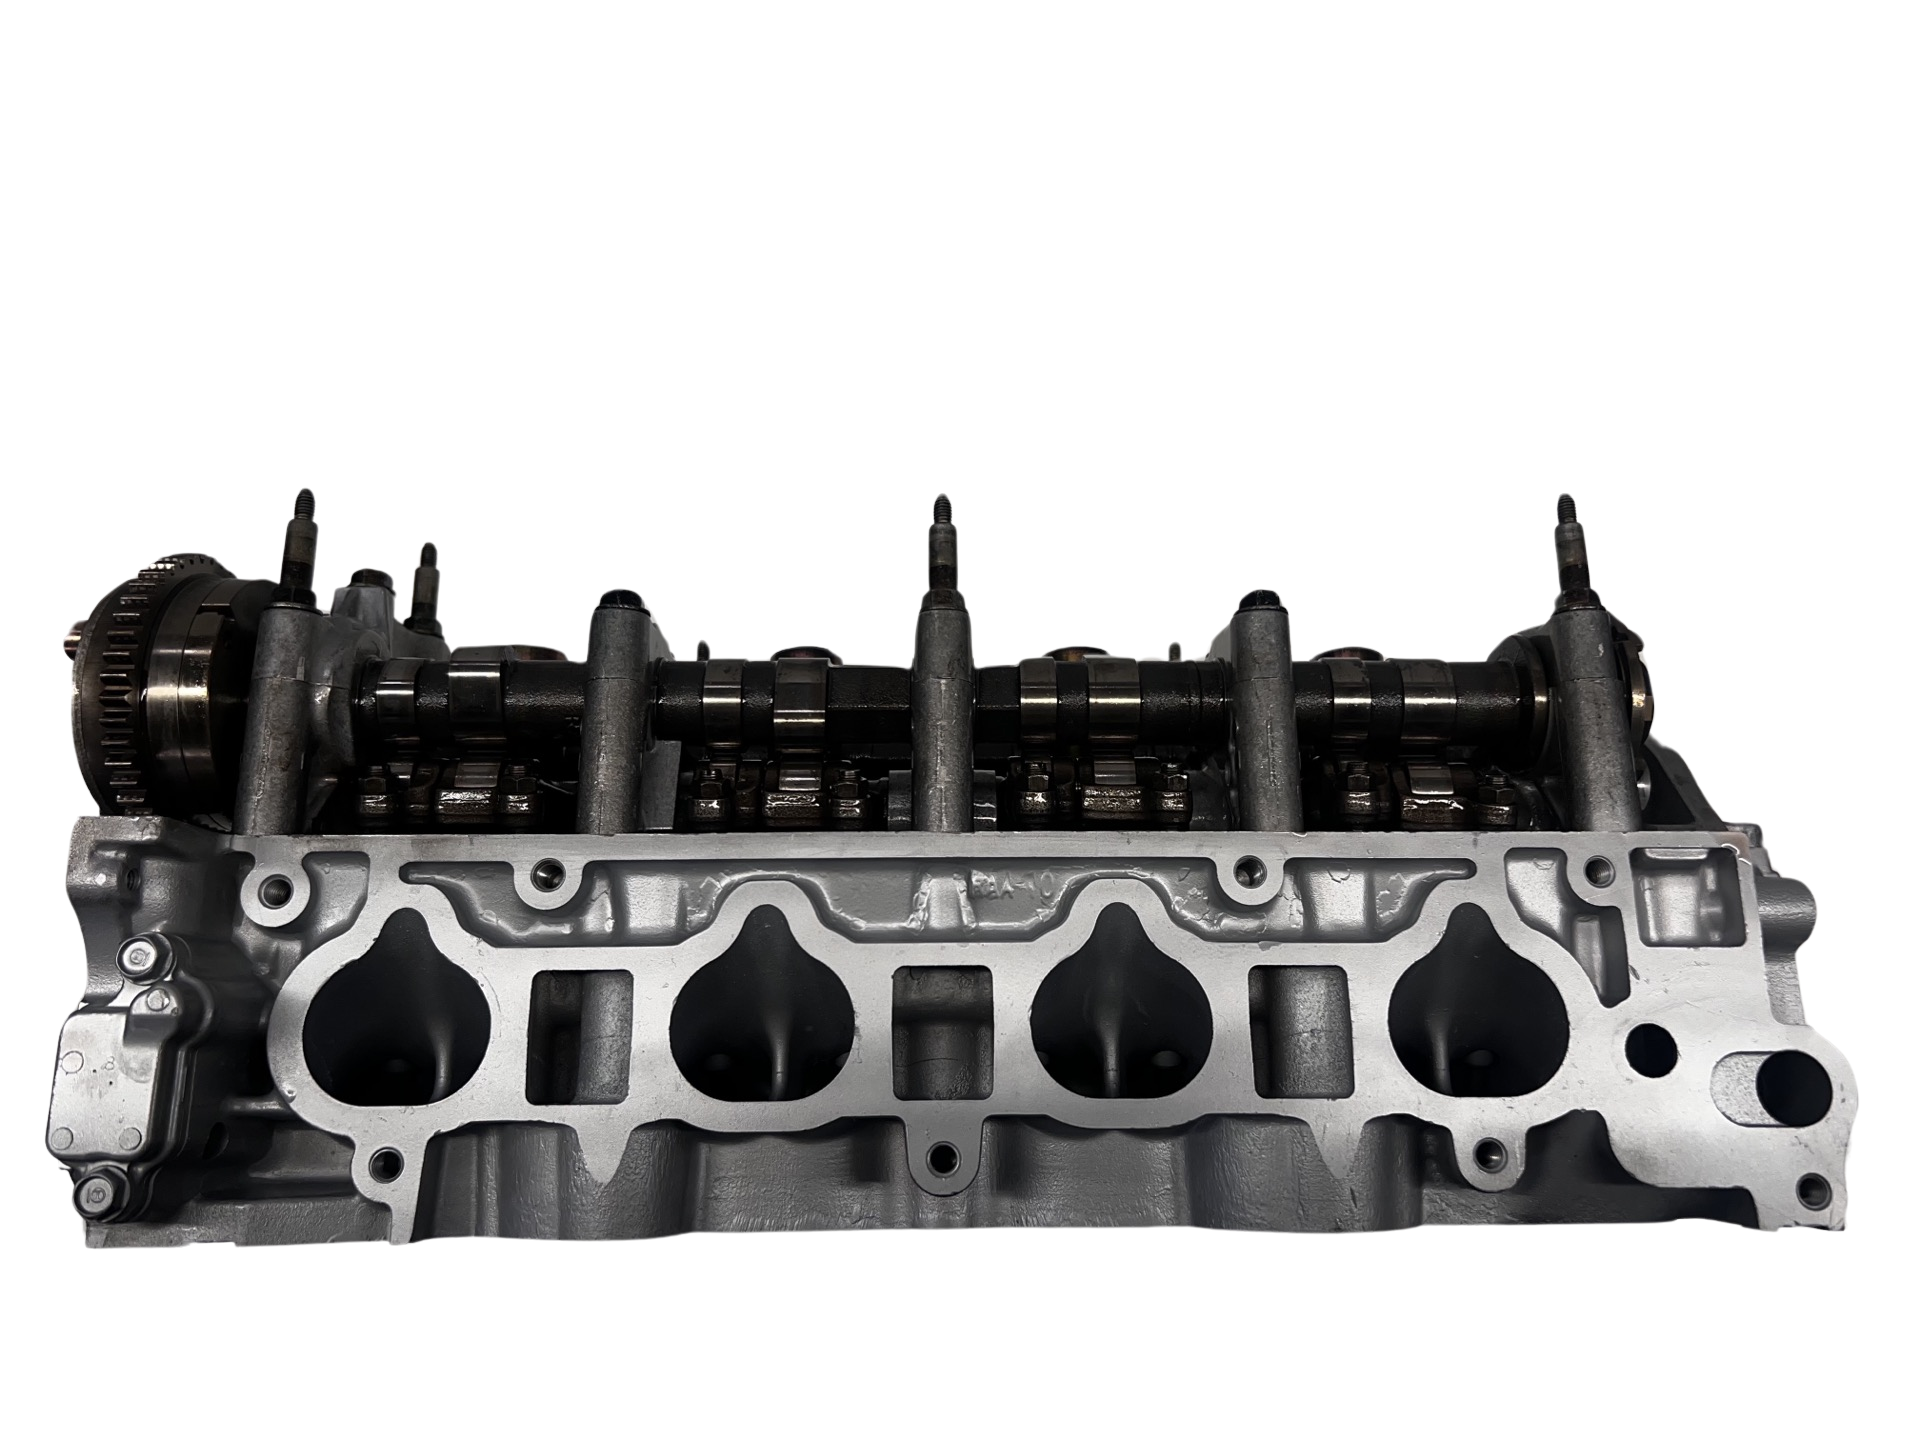 Intake side of cylinder head for a Honda K24A RAA 2.4L